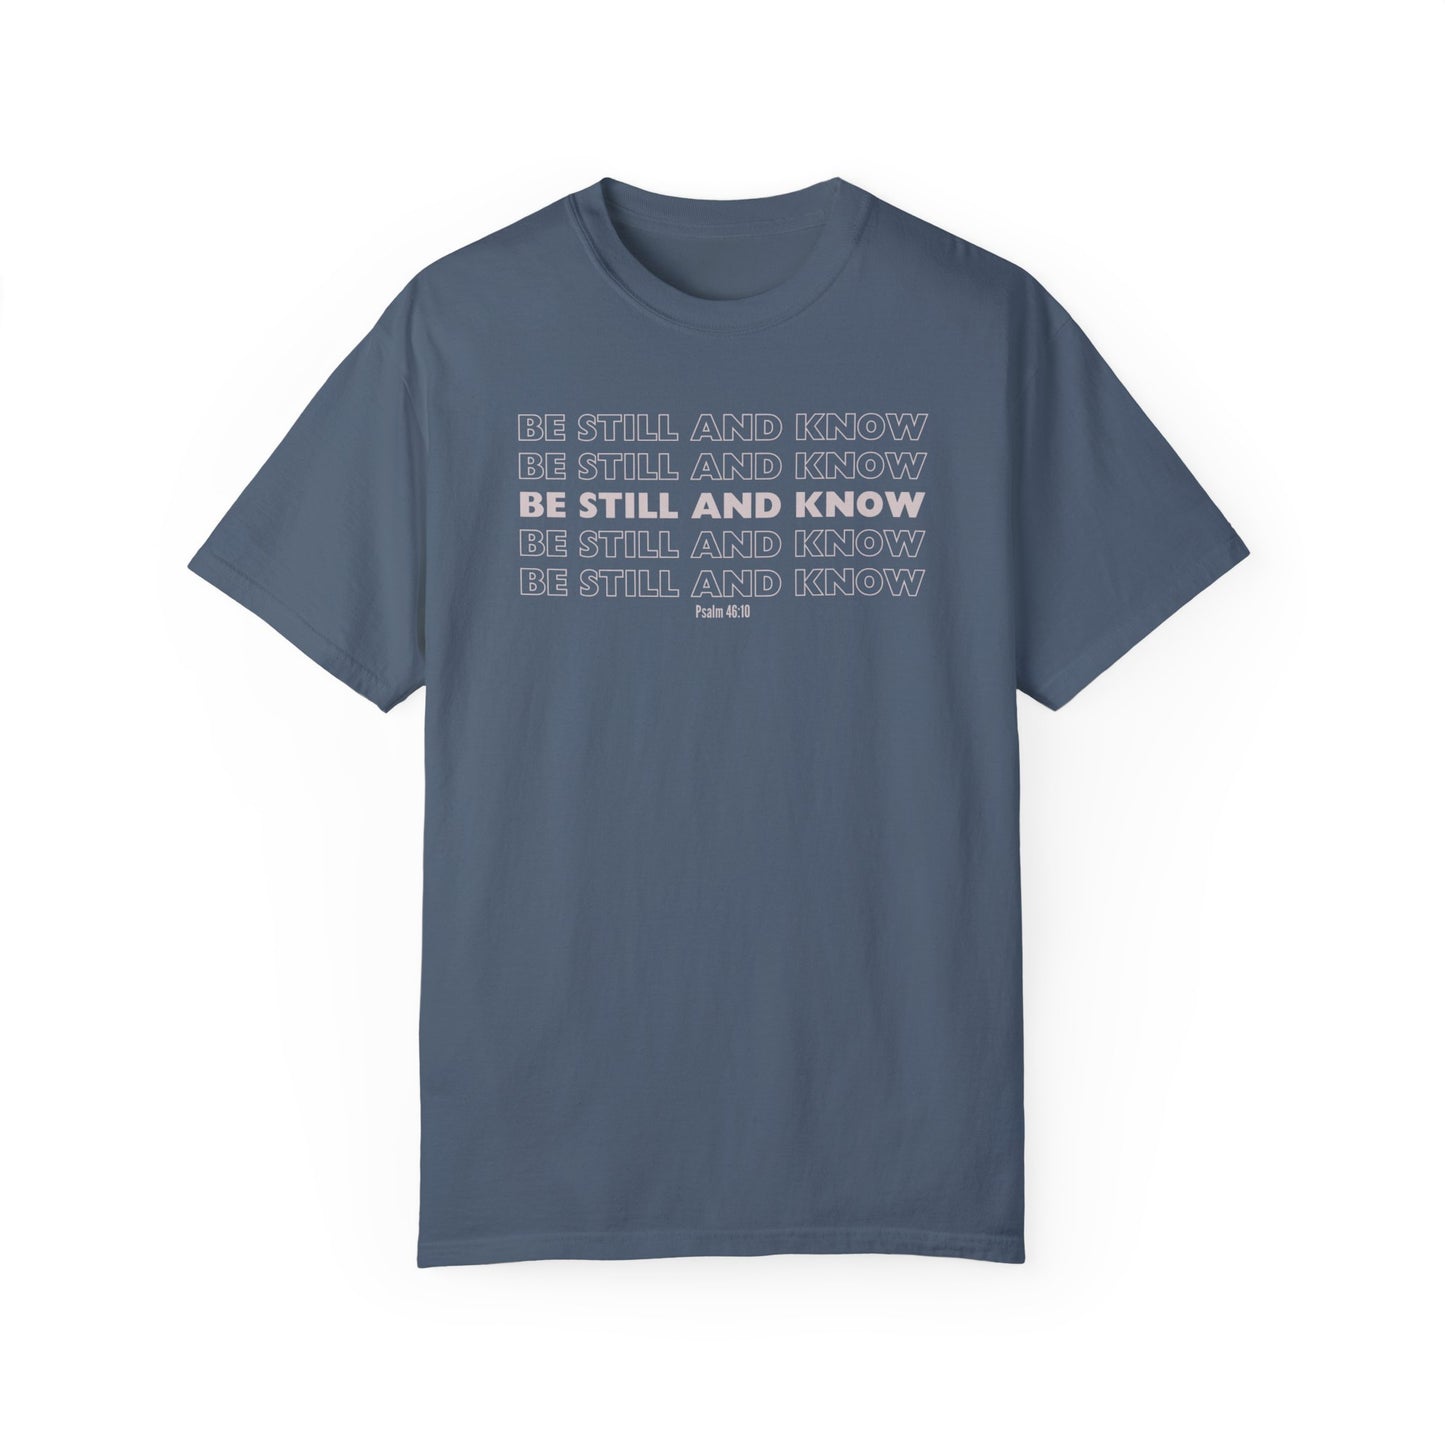 Be Still and Know Psalm 46:10 Bible Verse T-Shirt Oversize Shirt Hoodie Prayer Worship Bible Study Gift for Him Her Husband Wife Friend